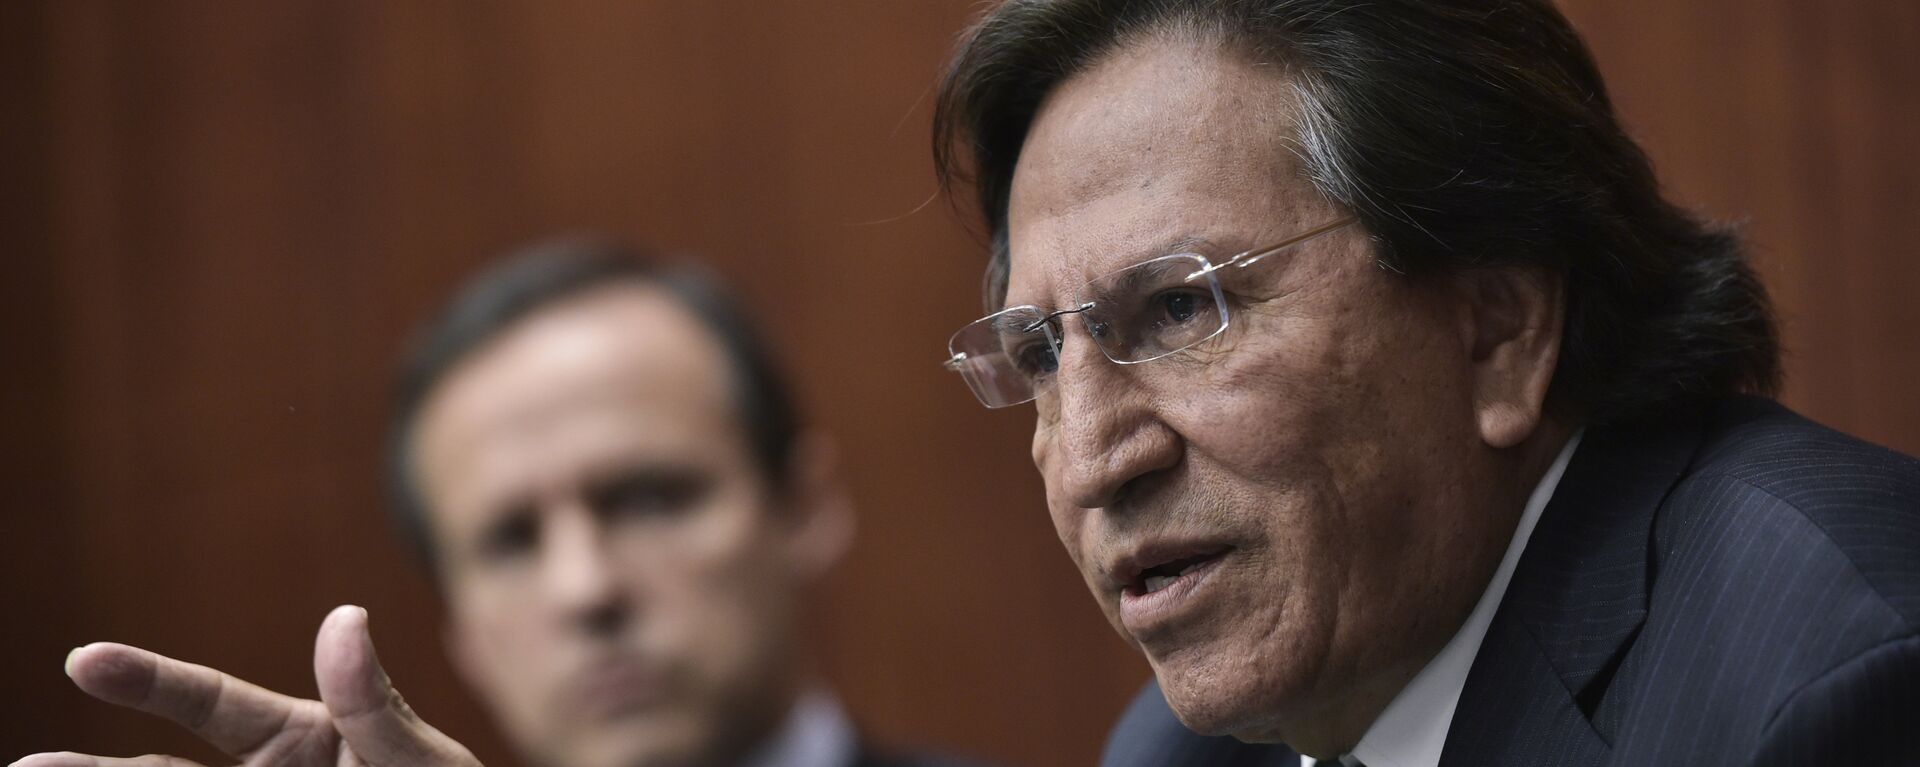 Former President of Peru Alejandro Toledo (R) speaks, watched by former President of Bolivia Jorge Quiroga (L), during a discussion on Venezuela and the OAS at The Center for Strategic and International Studies (CSIS) on June 17, 2016 in Washington, DC.  - Sputnik Mundo, 1920, 29.09.2021